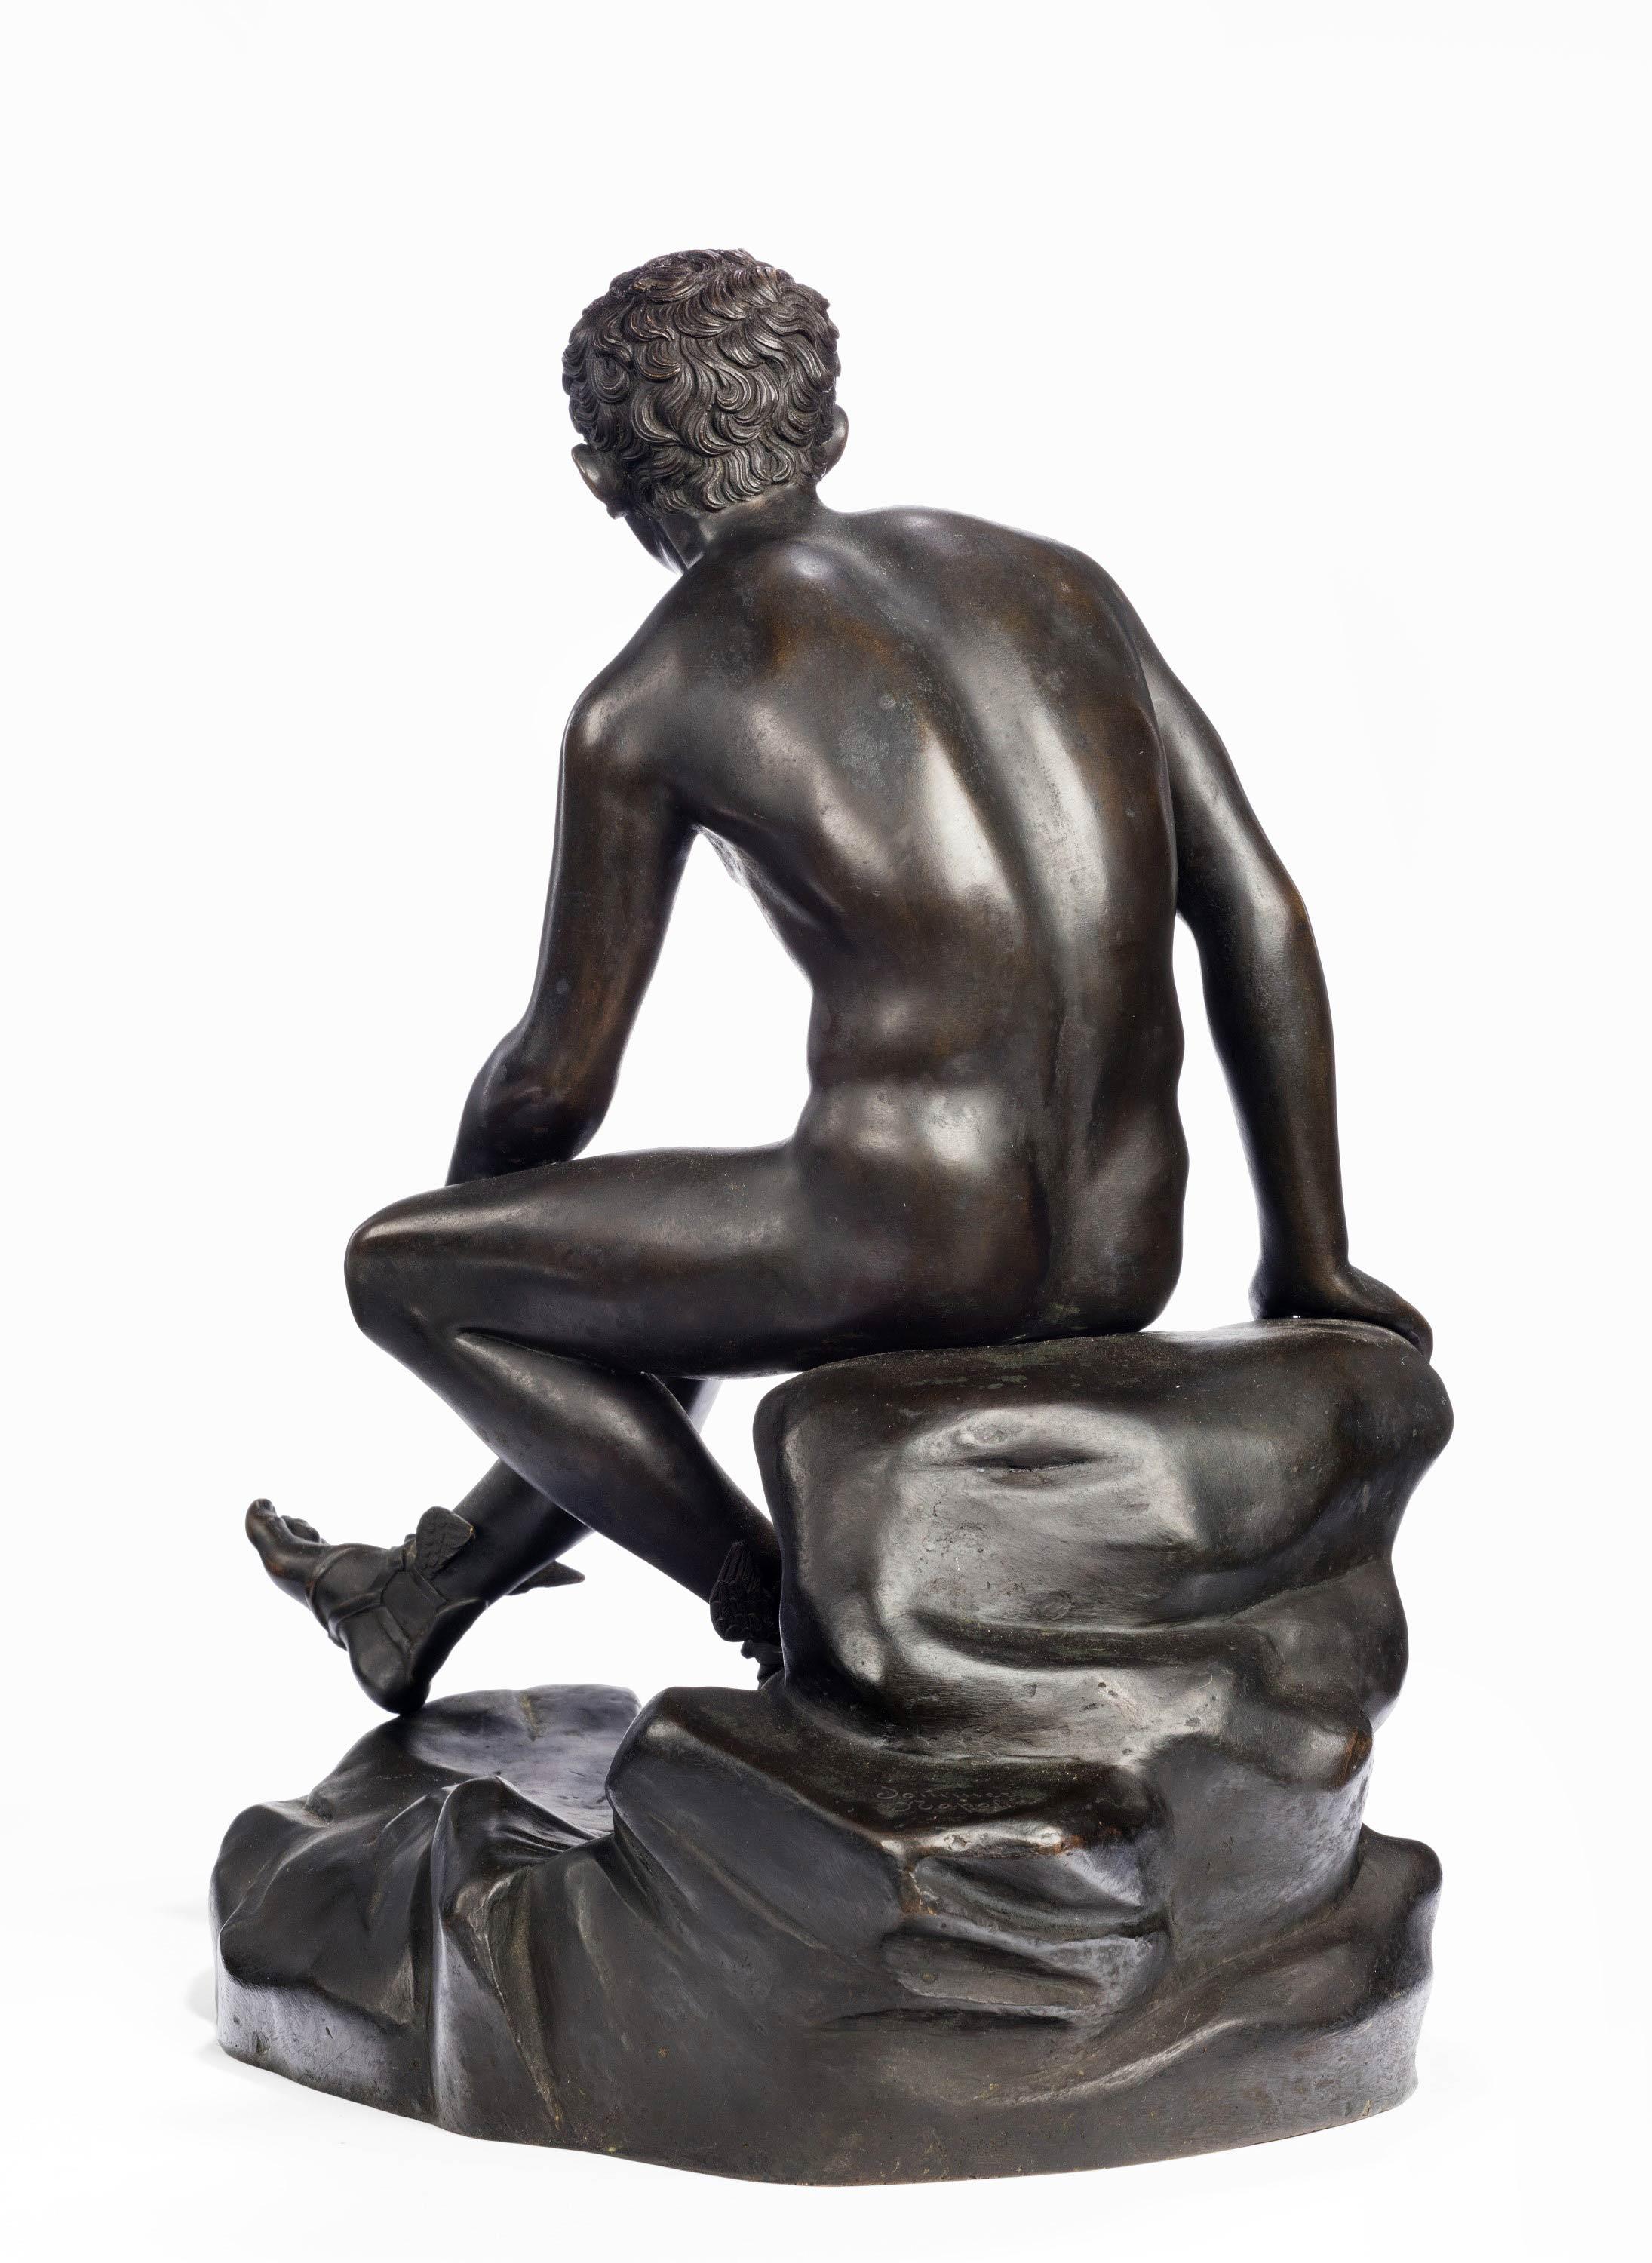 A good and beautifully detailed bronze figure of Hermes signed Fonderia Sommer, circa 1900. Fine, original, patina and of an unusually large size for this particular model.
   